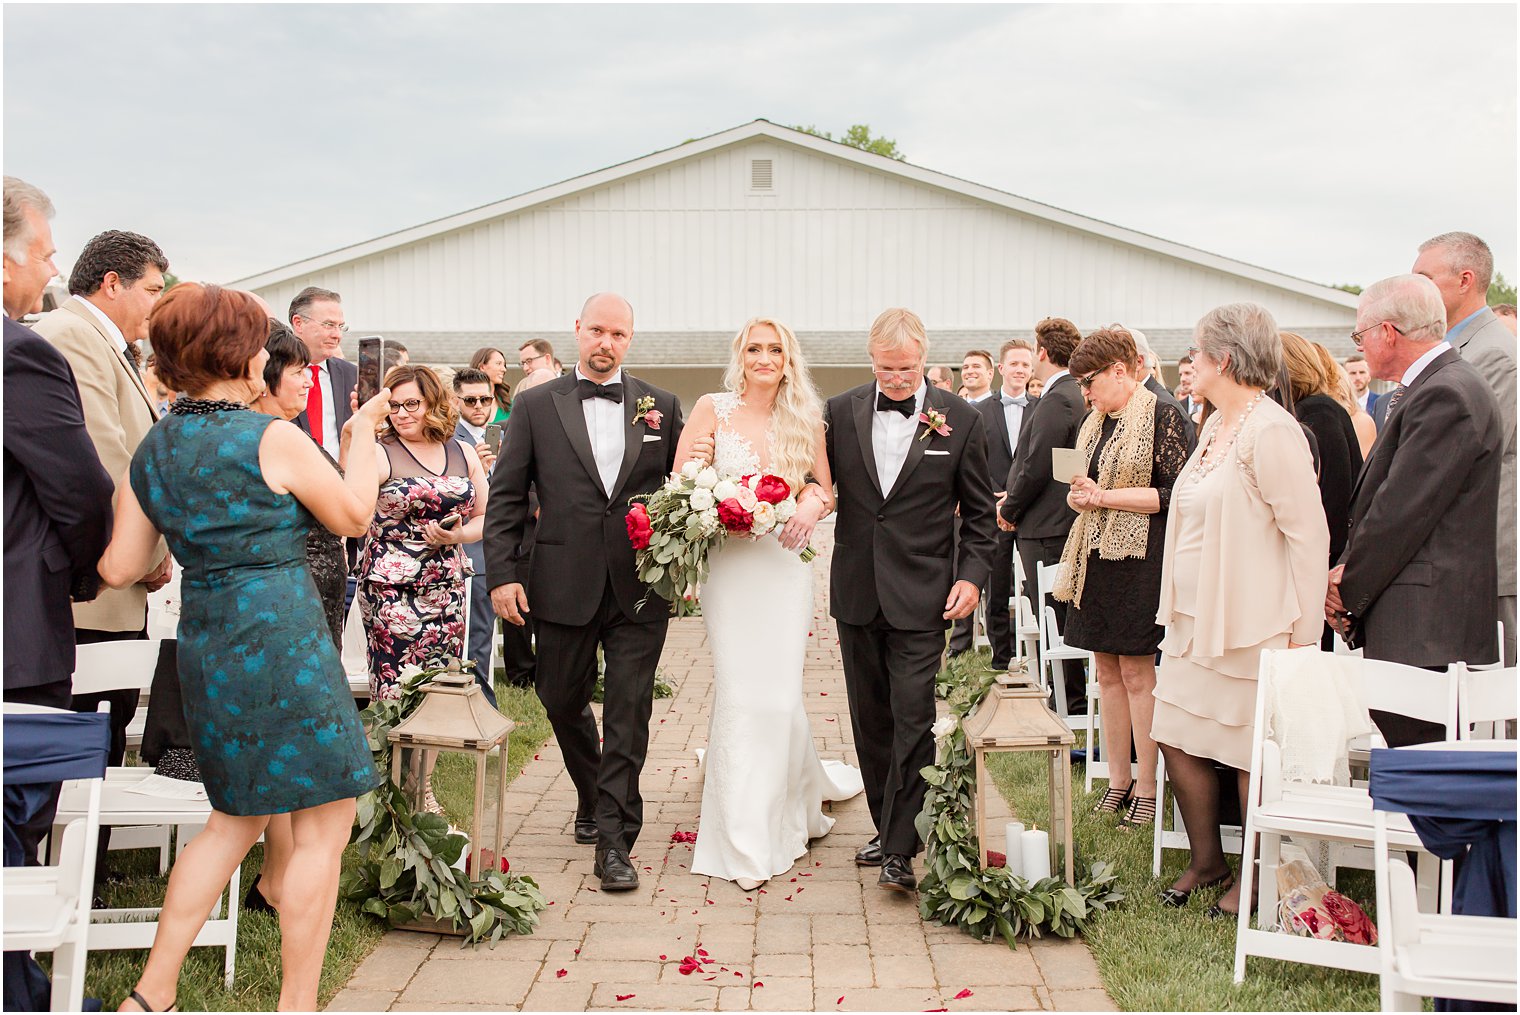 Outdoor ceremony at the Farmhouse at the Grand Colonial in Hampton, NJ